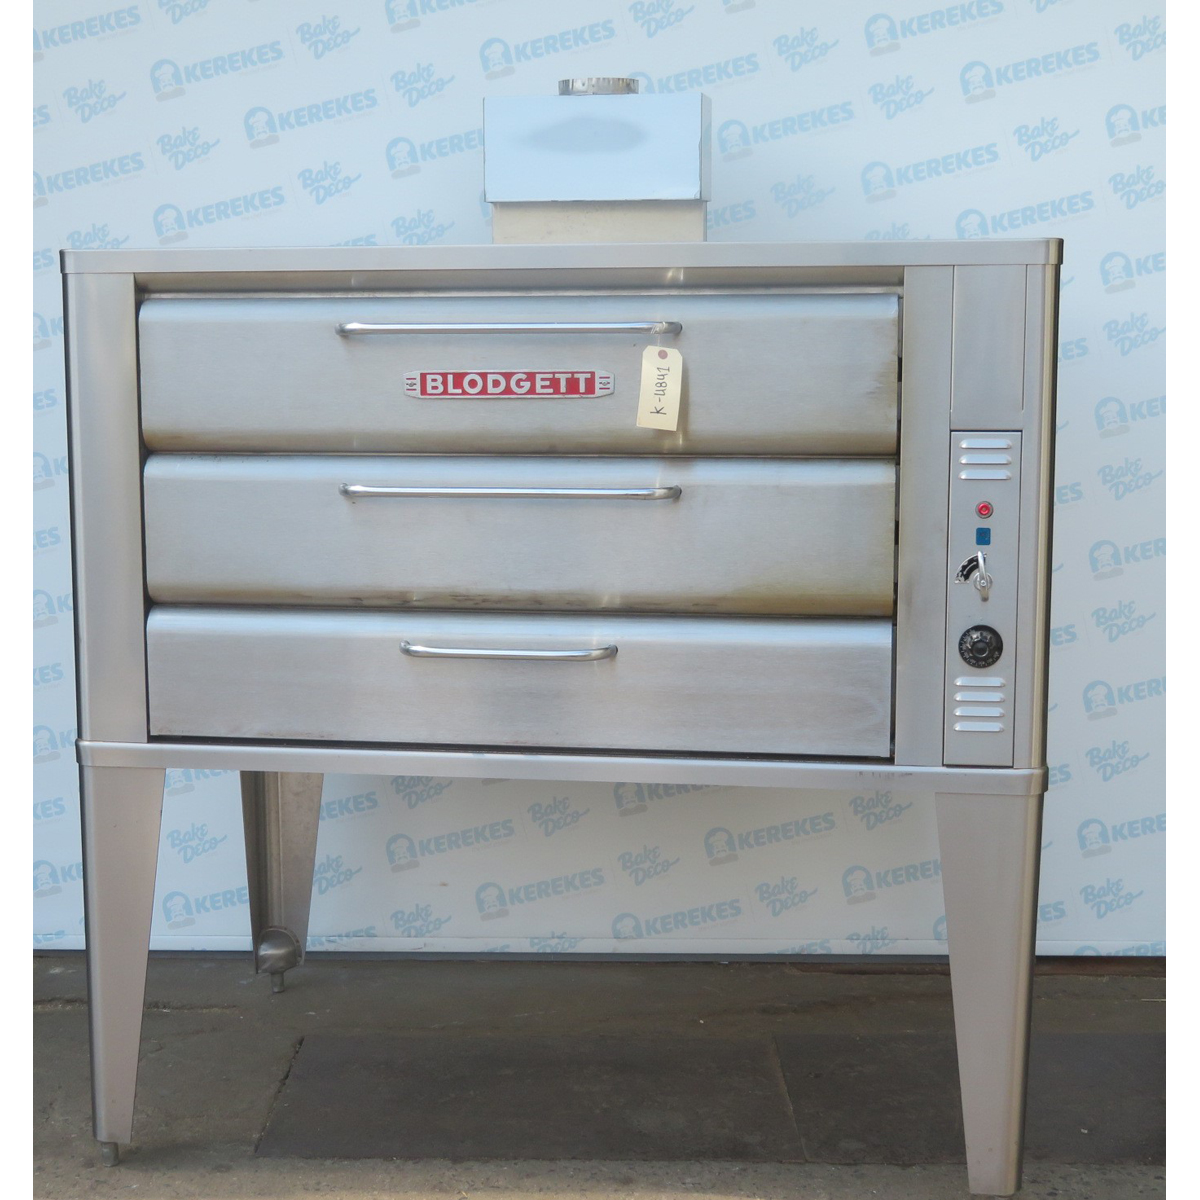 Blodgett 981 Deck Oven, Used Great Condition